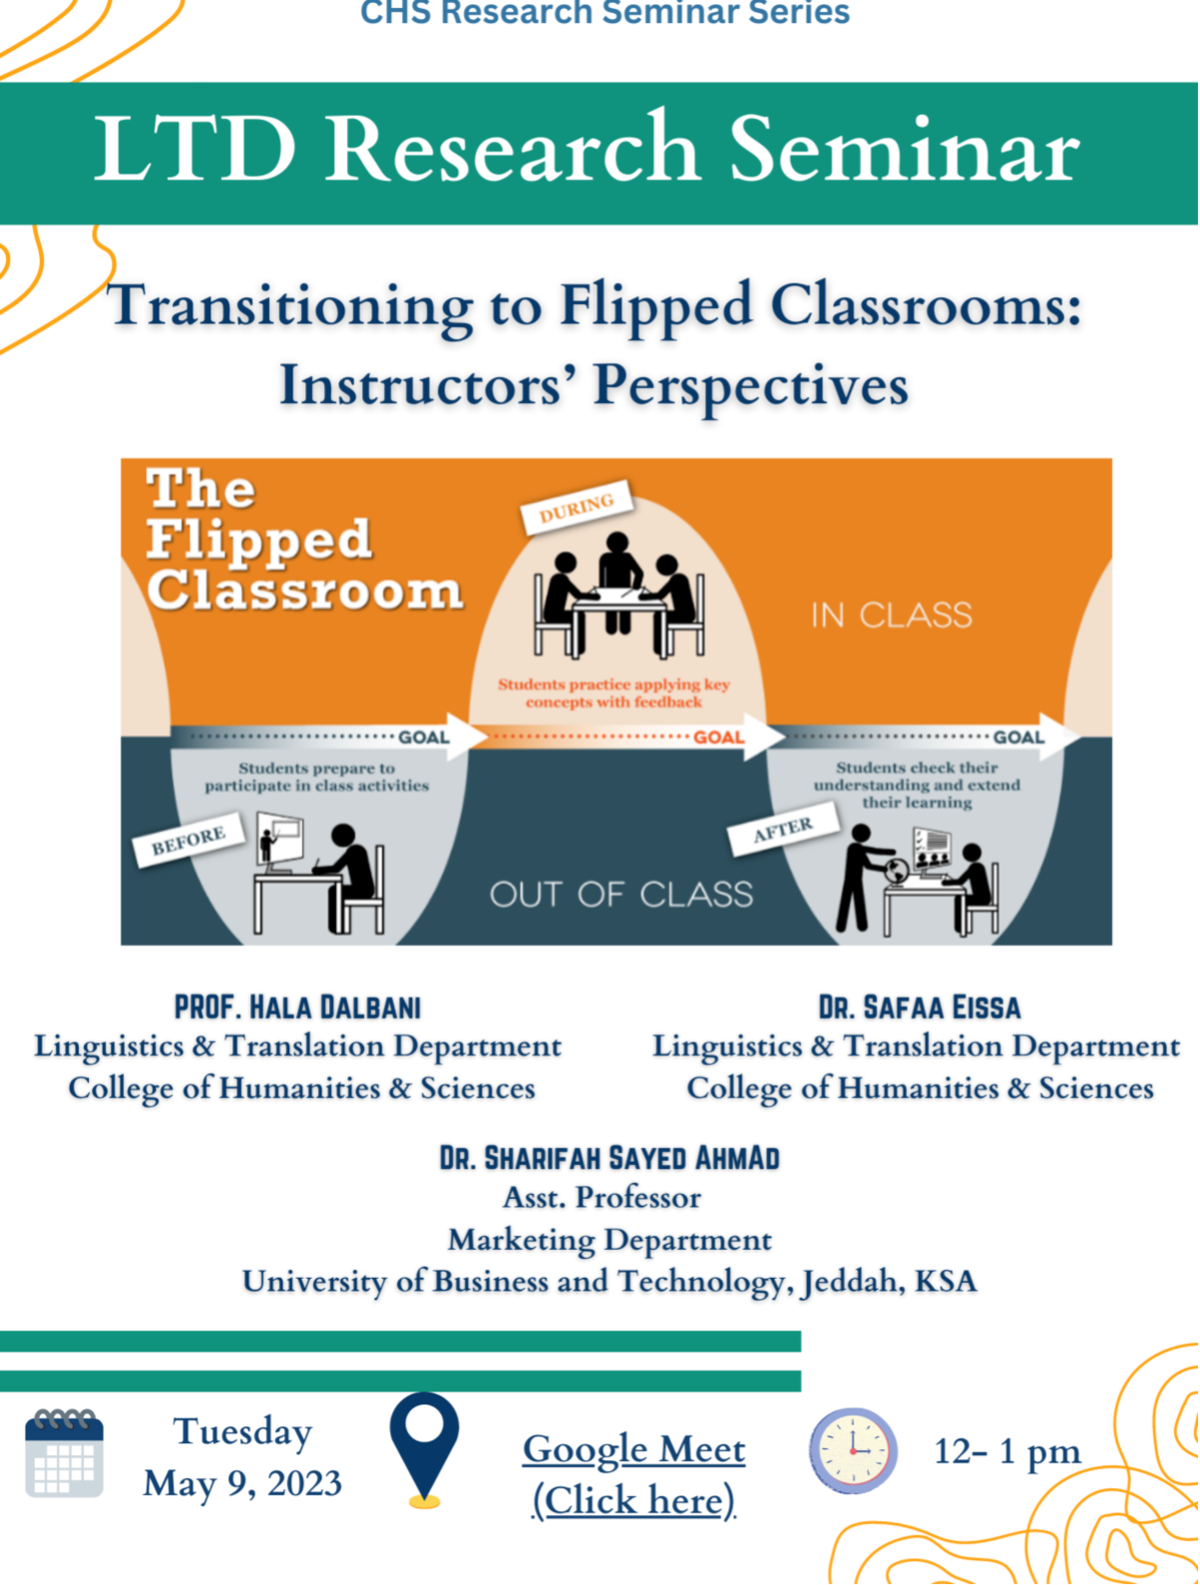 TRANSITIONING TO FLIPPIED CLASSROOMS: INSTRUCTORS' PERSPECTIVES